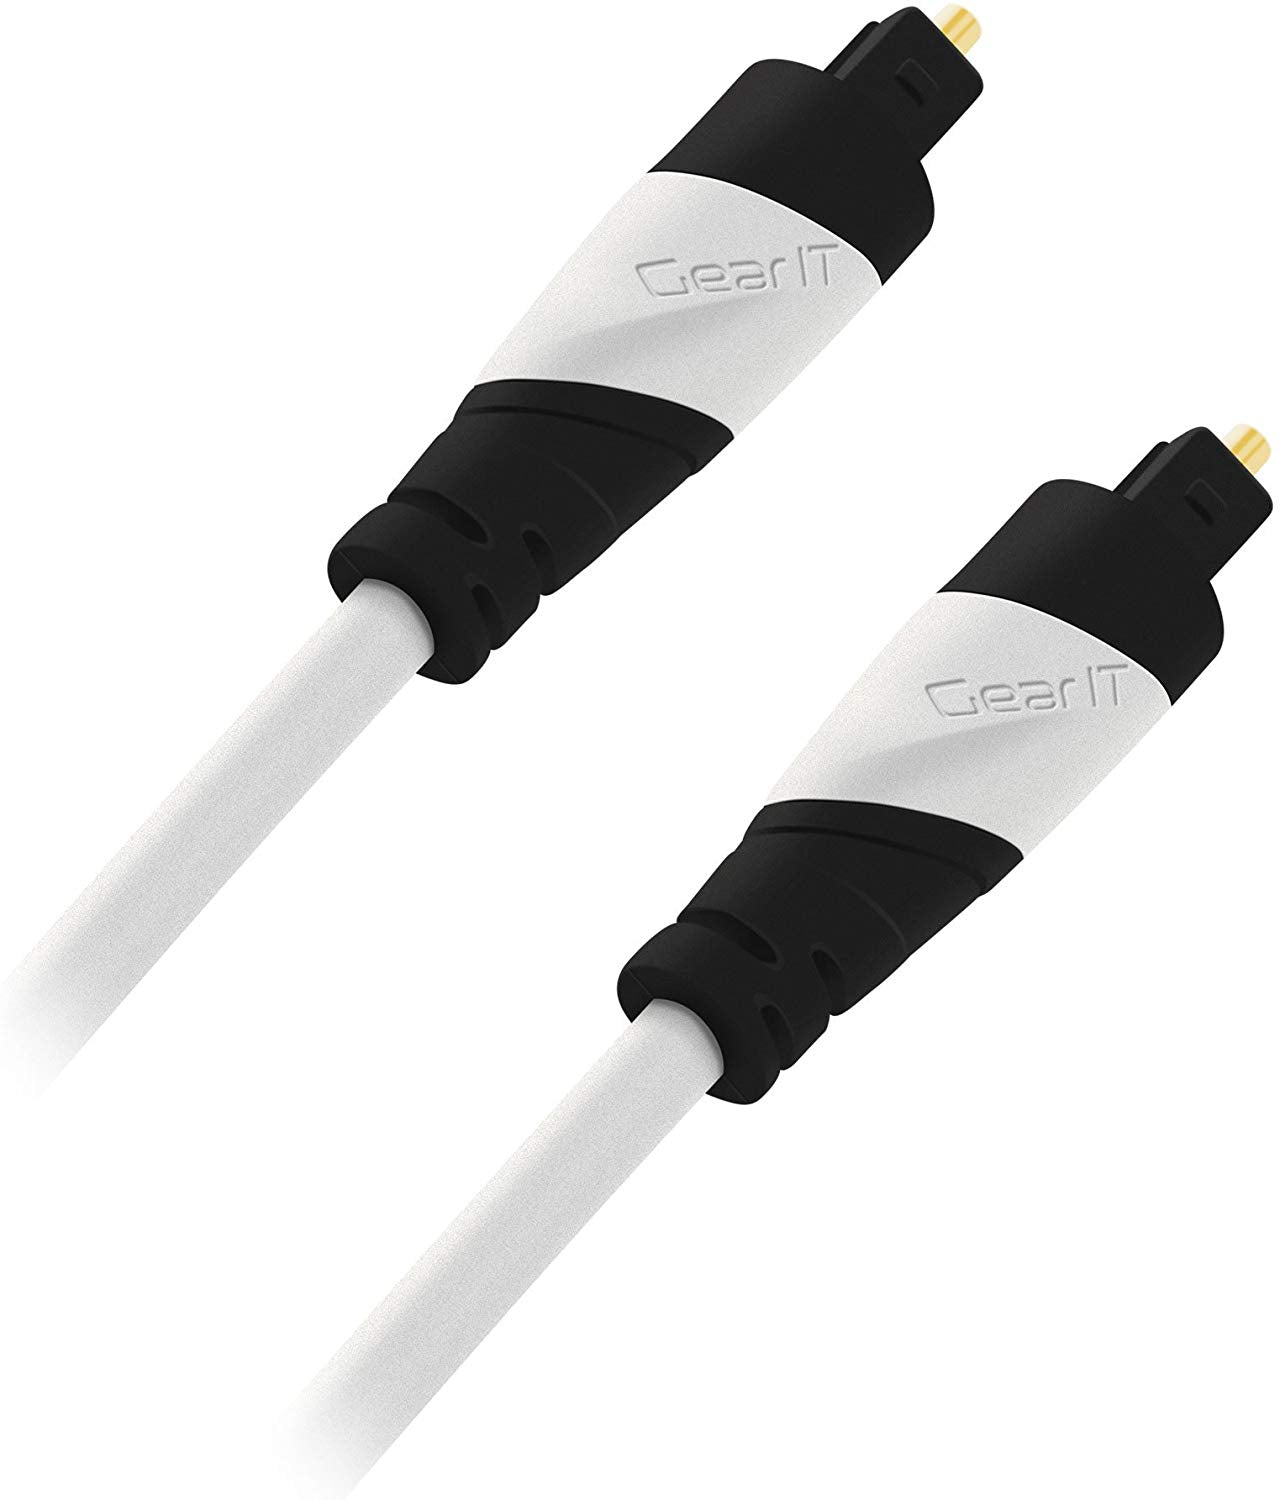 Toslink Optical Audio Cable 12 FT